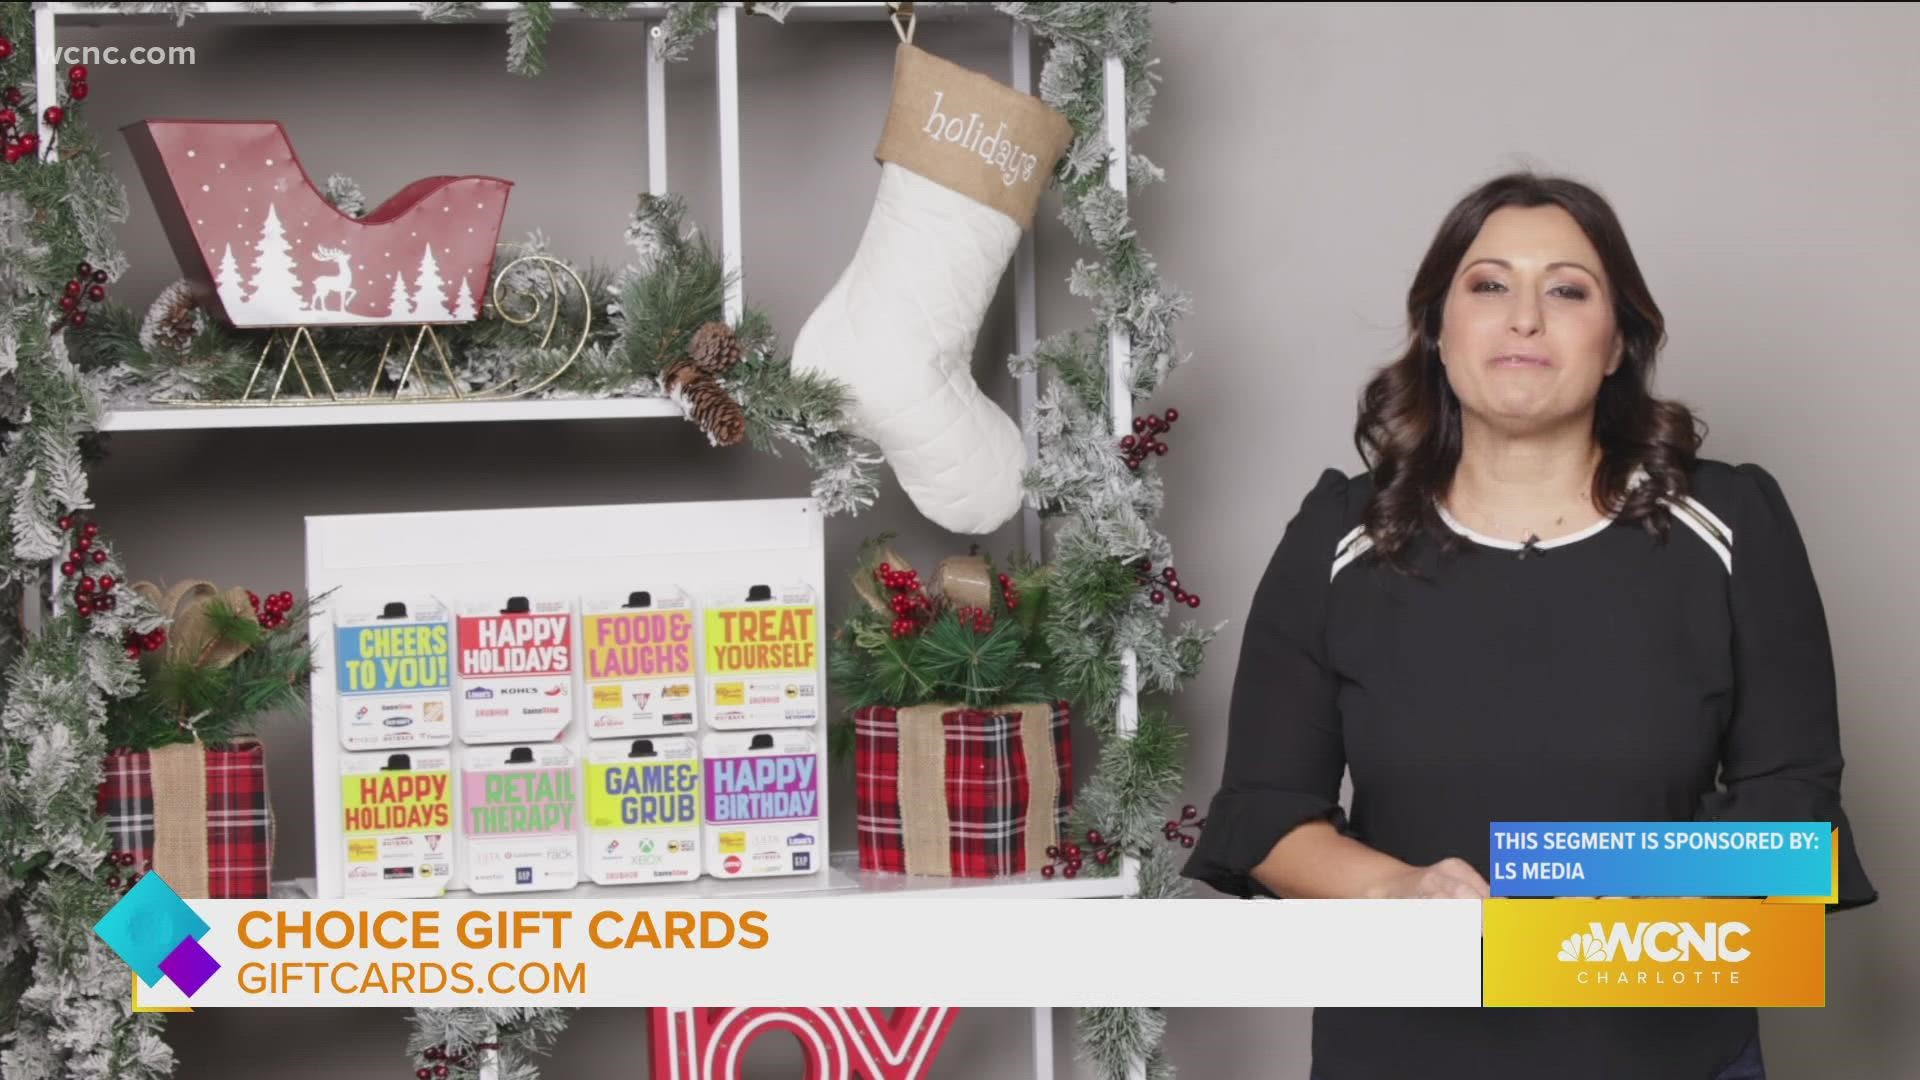 Holiday gift ideas sponsored by Limor Media